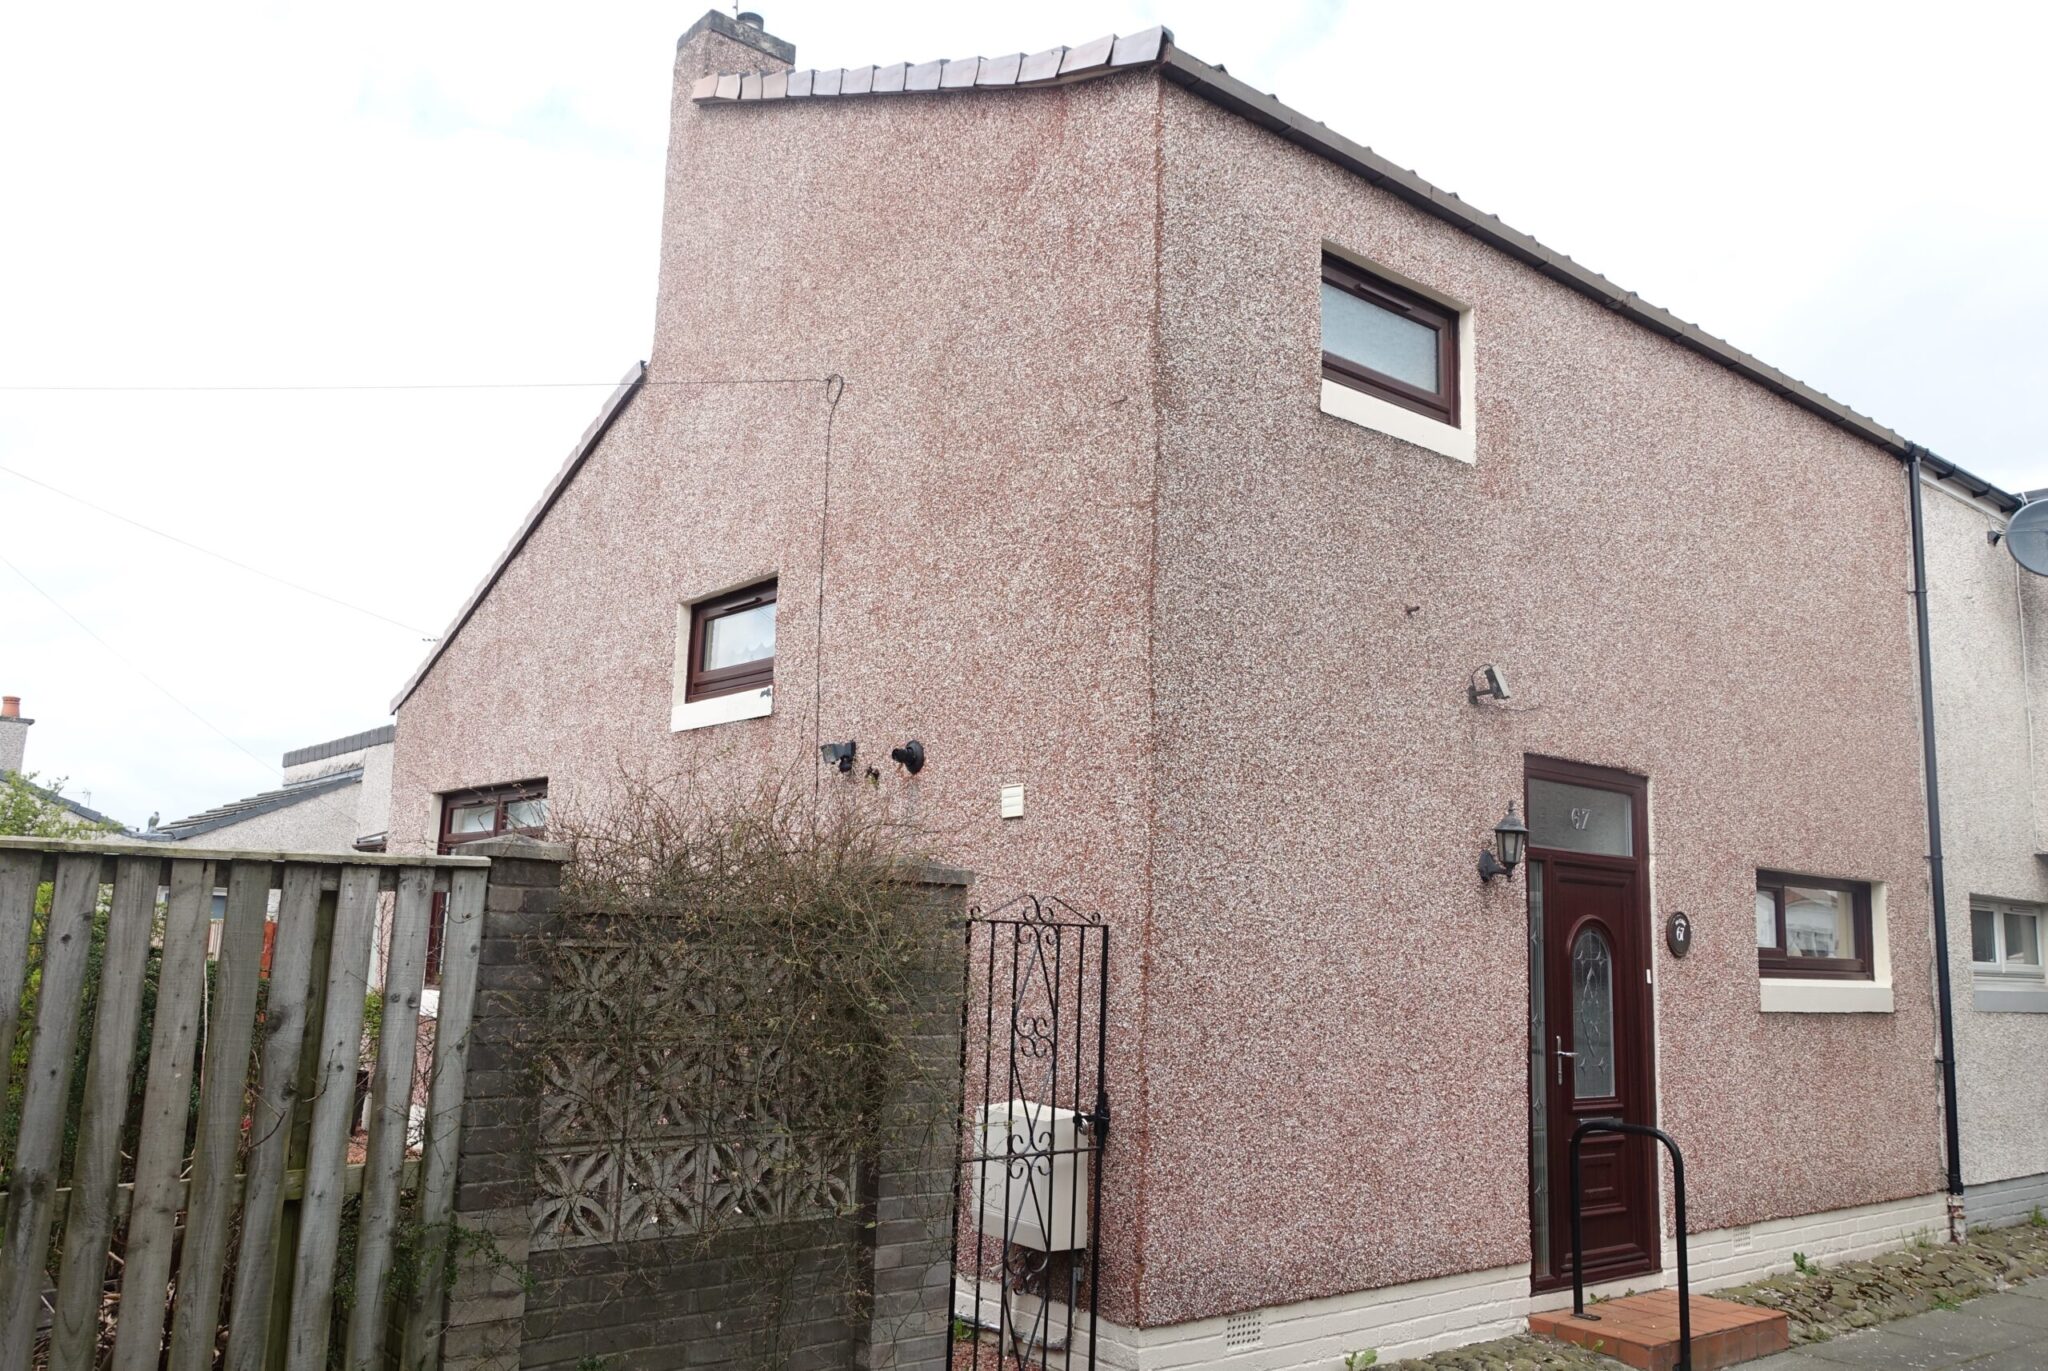 67 Wotherspoon Drive, Bo’ness